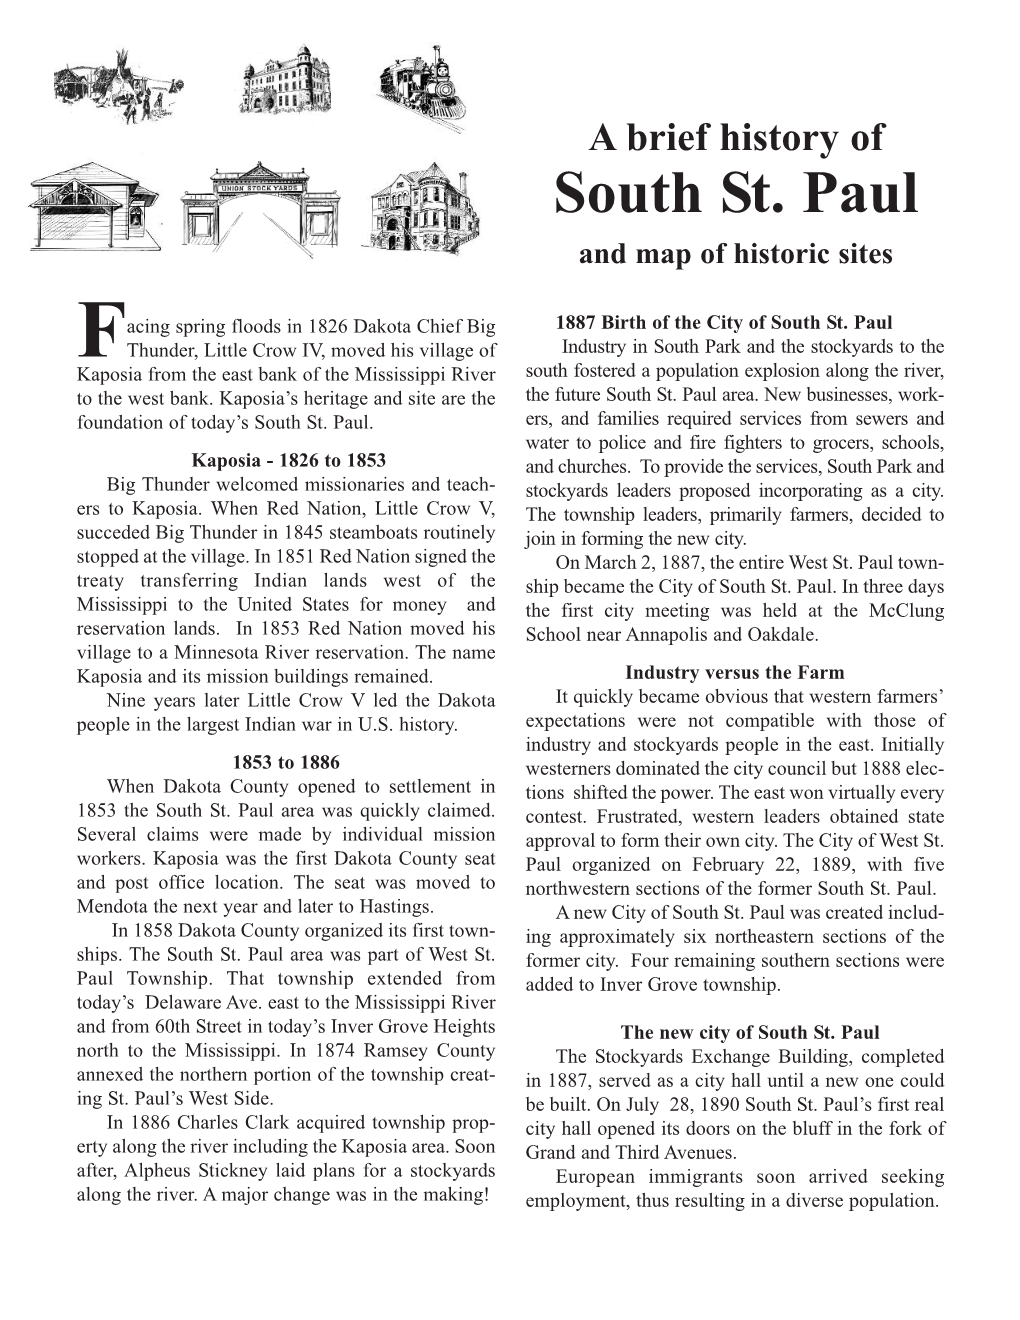 A Brief History of South St